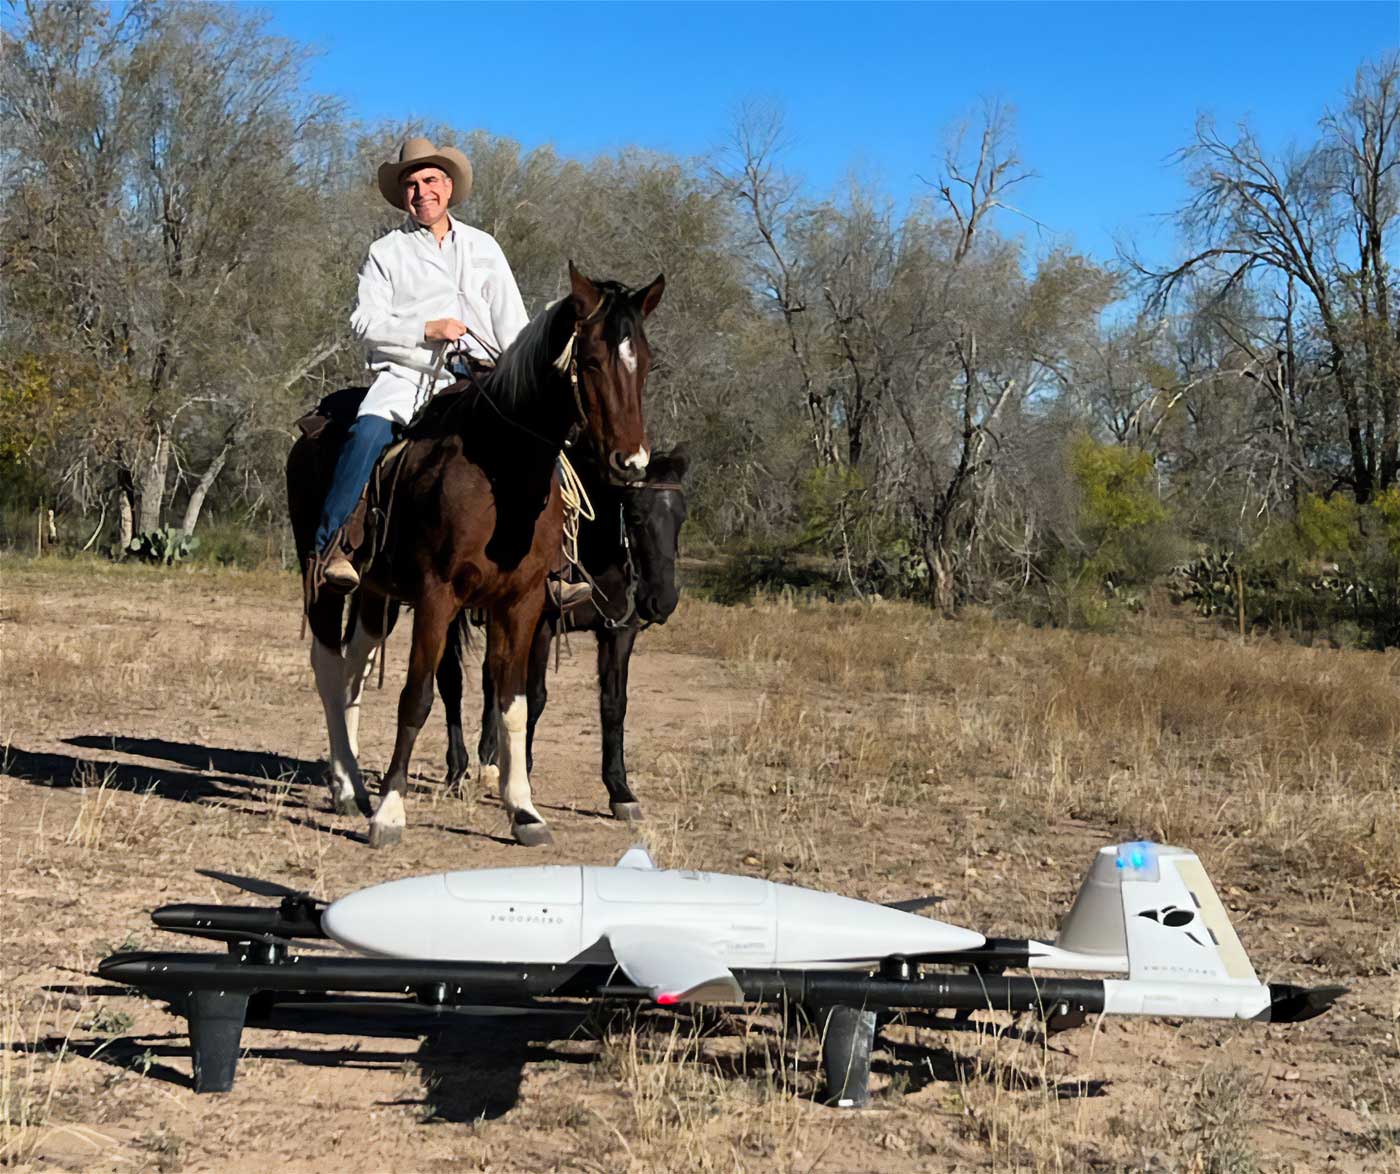 Billings and drone in Alpine, Texas